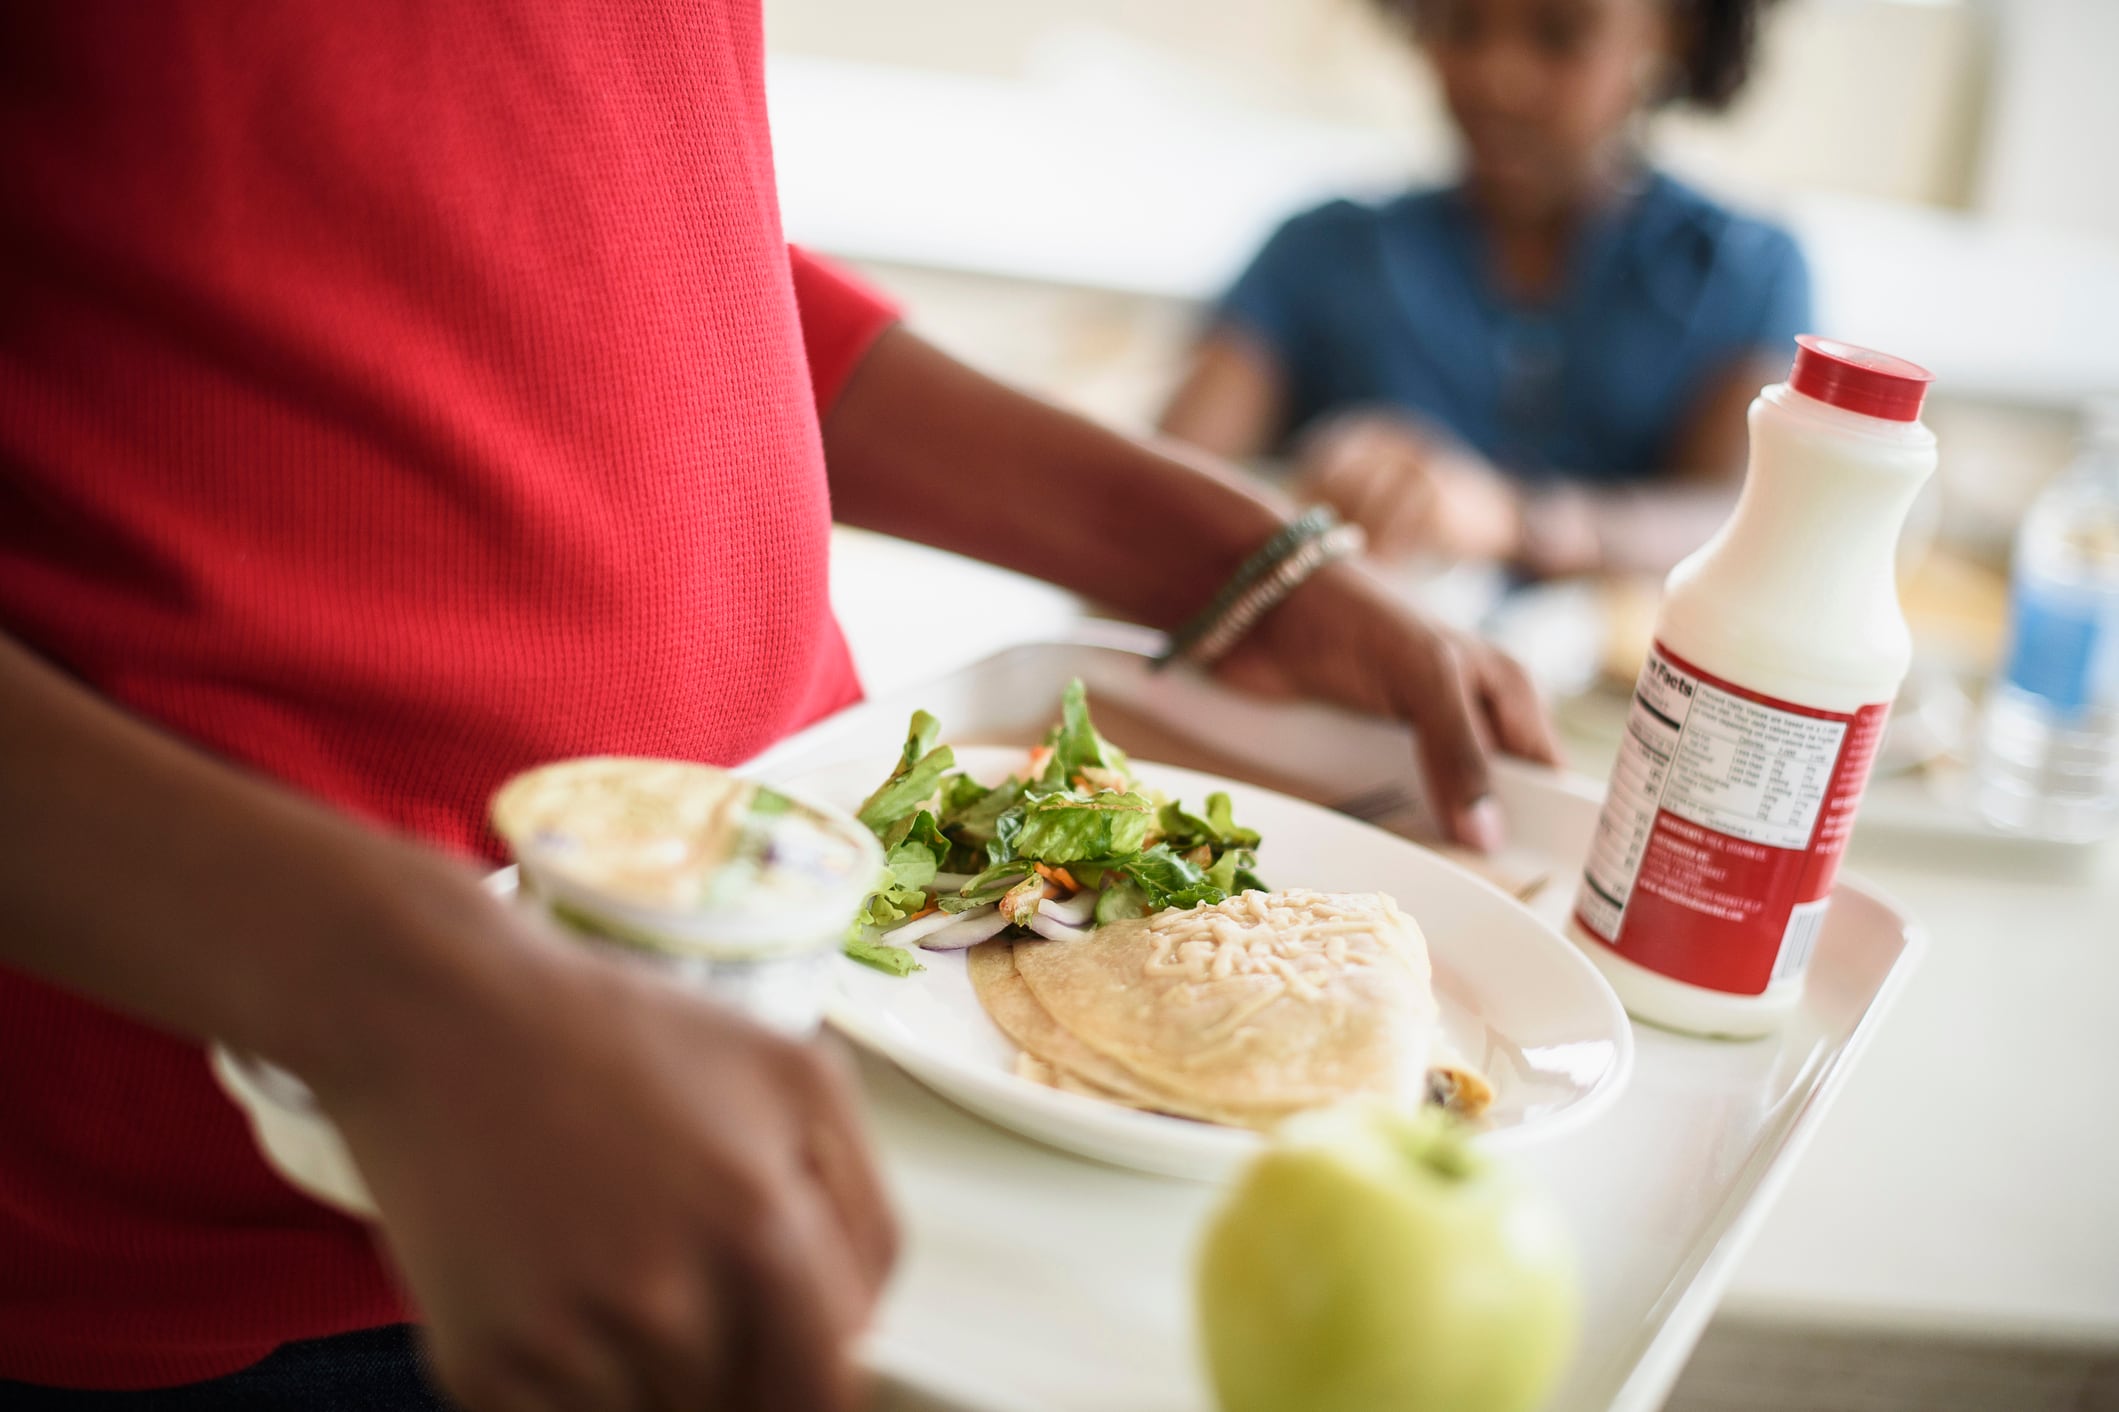 A close up of a young student carrying a tray full of school food including milk, an apple, a salad and other things. A student sitting at a table is in the background.